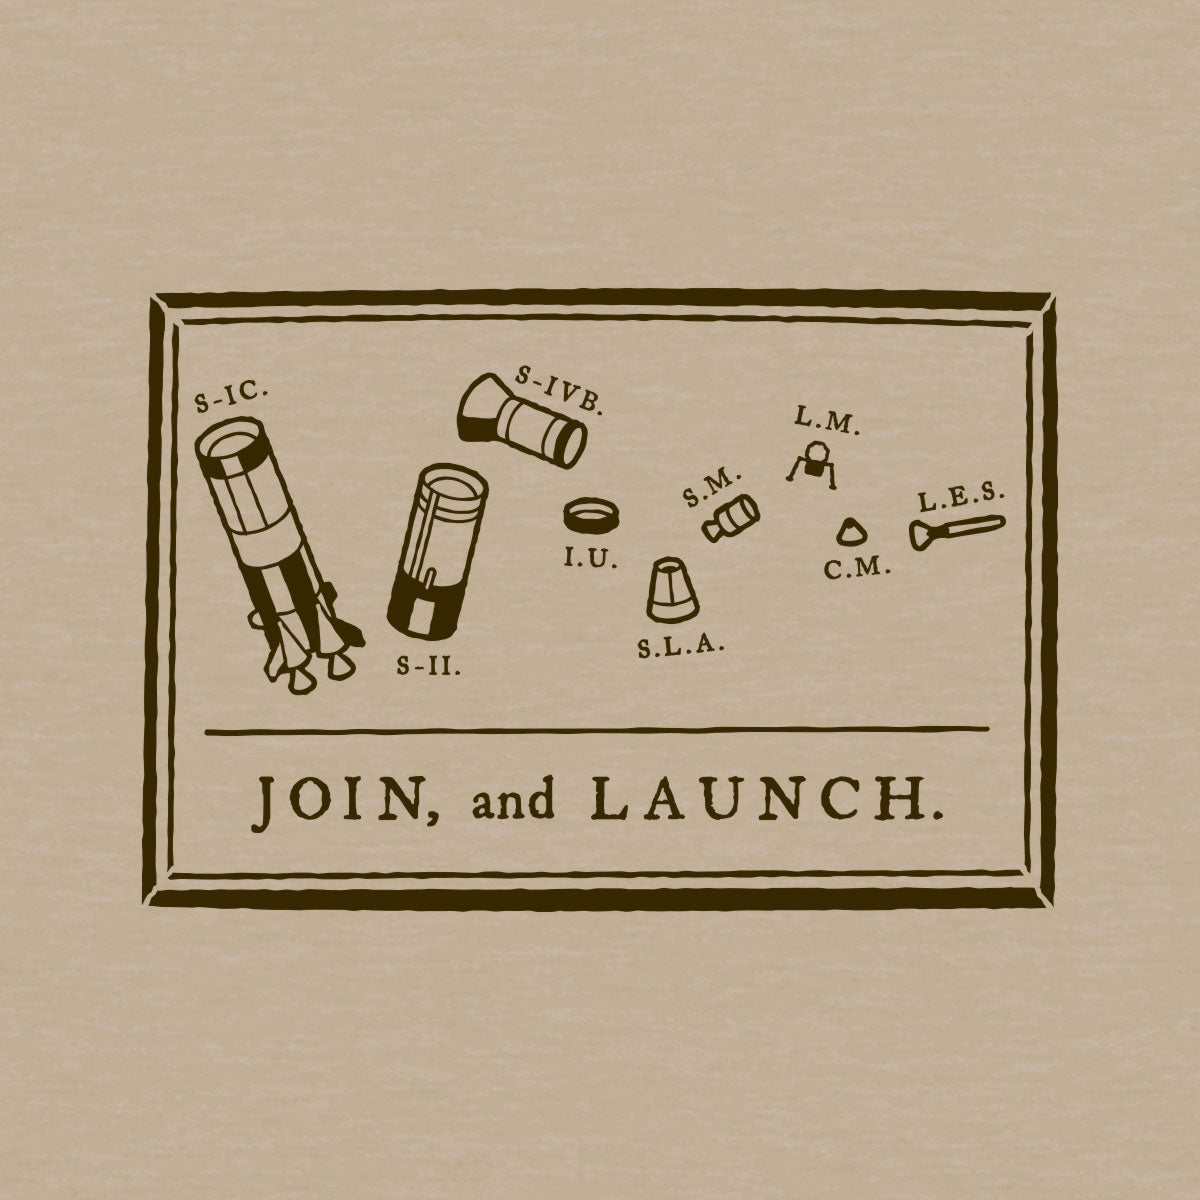 Thumbnail of Saturn V rocket in pieces with the text "Join, and Launch" in the style of "join or die" political campaign